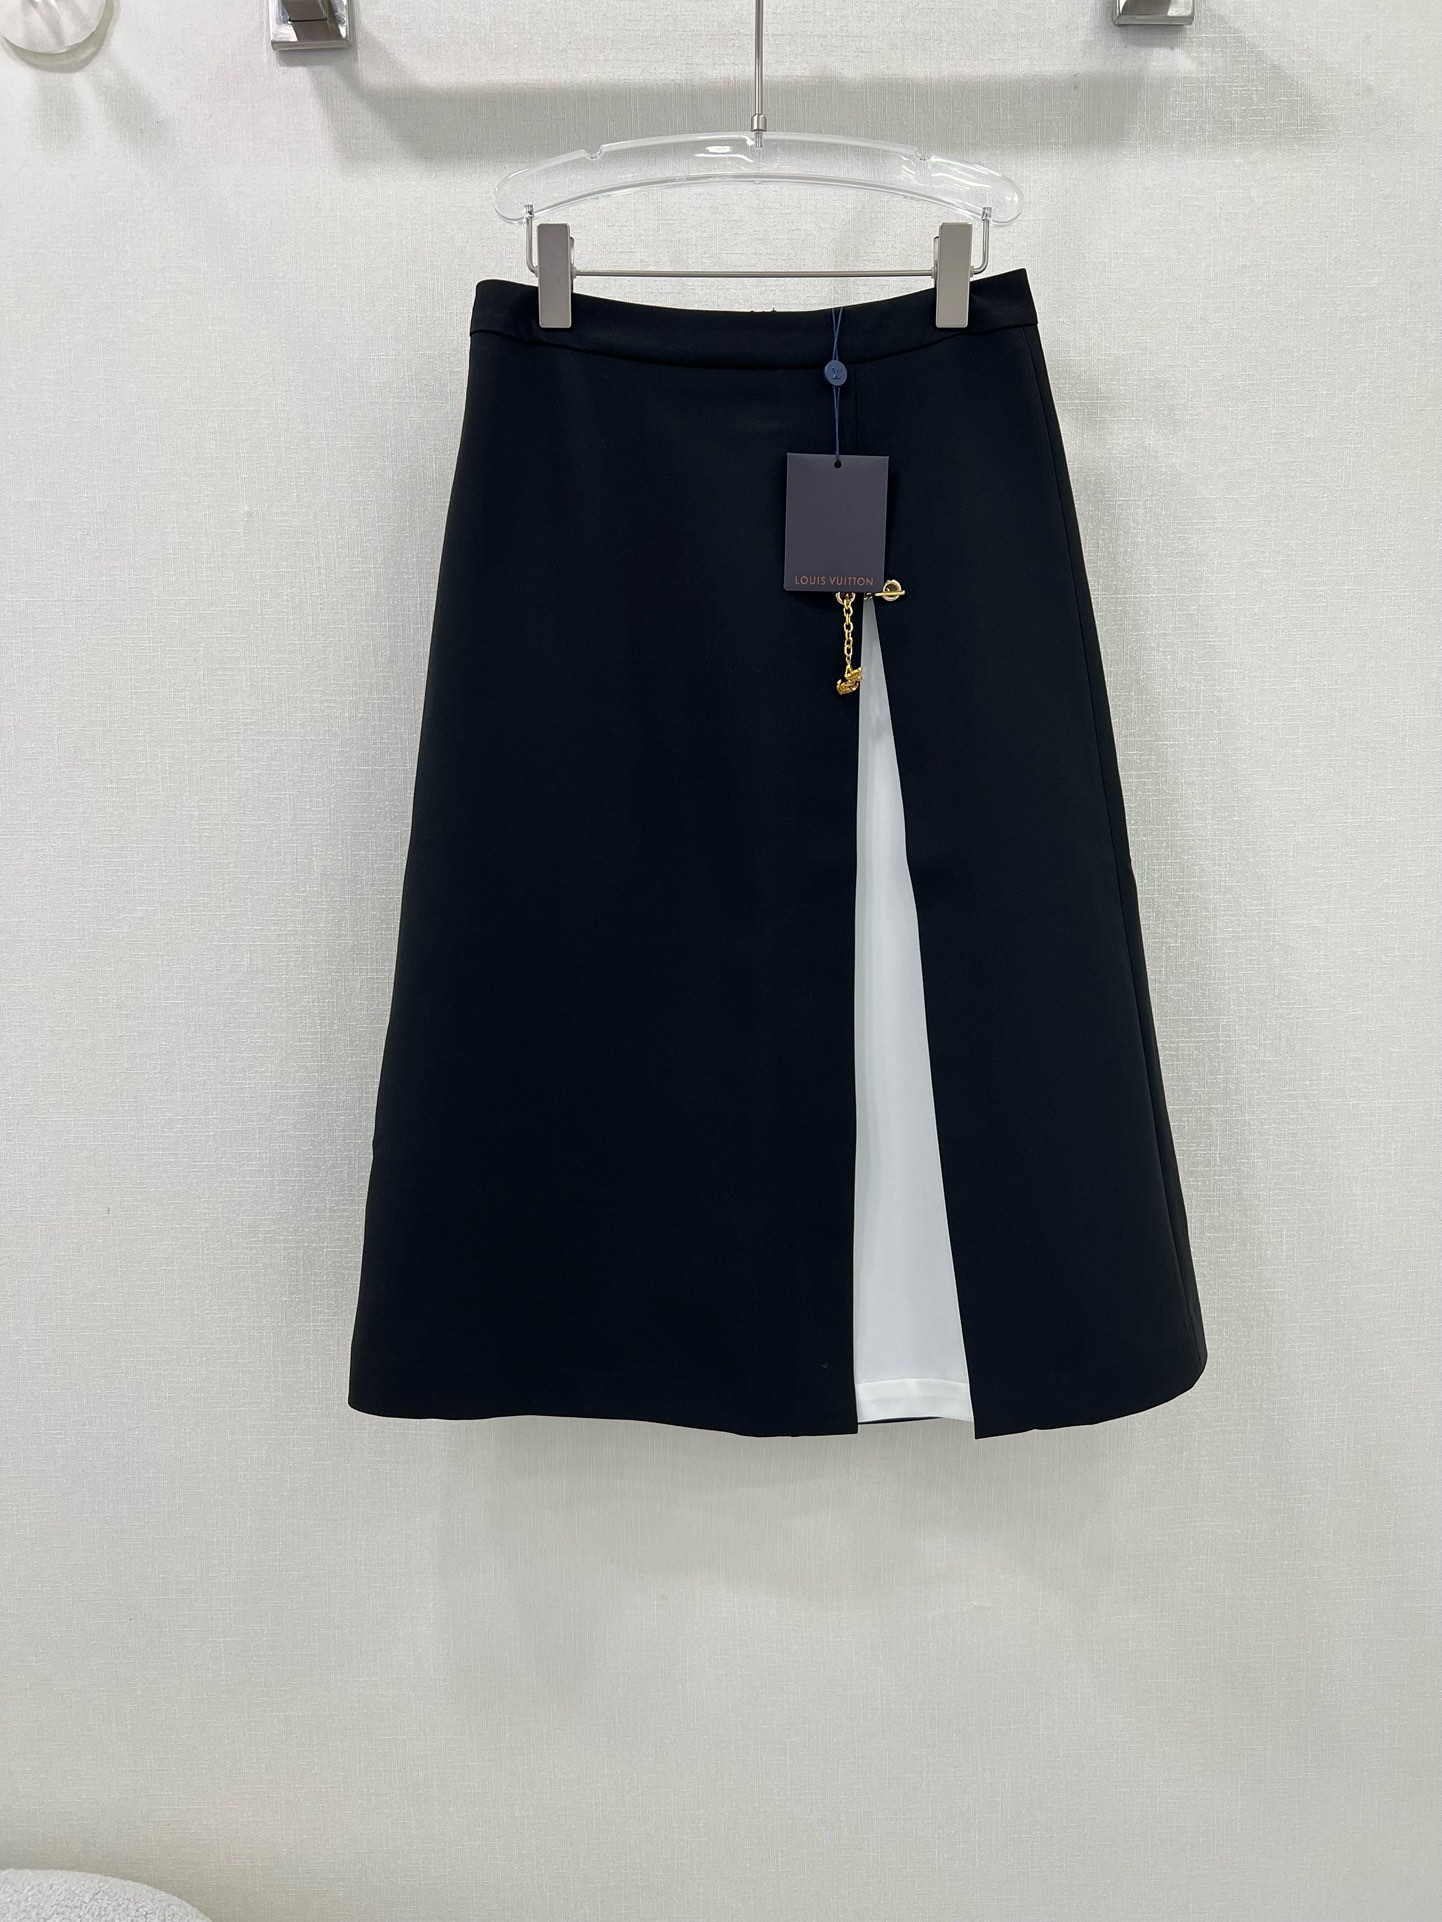 Louis Vuitton Clothing Skirts Black White Splicing Spring/Summer Collection